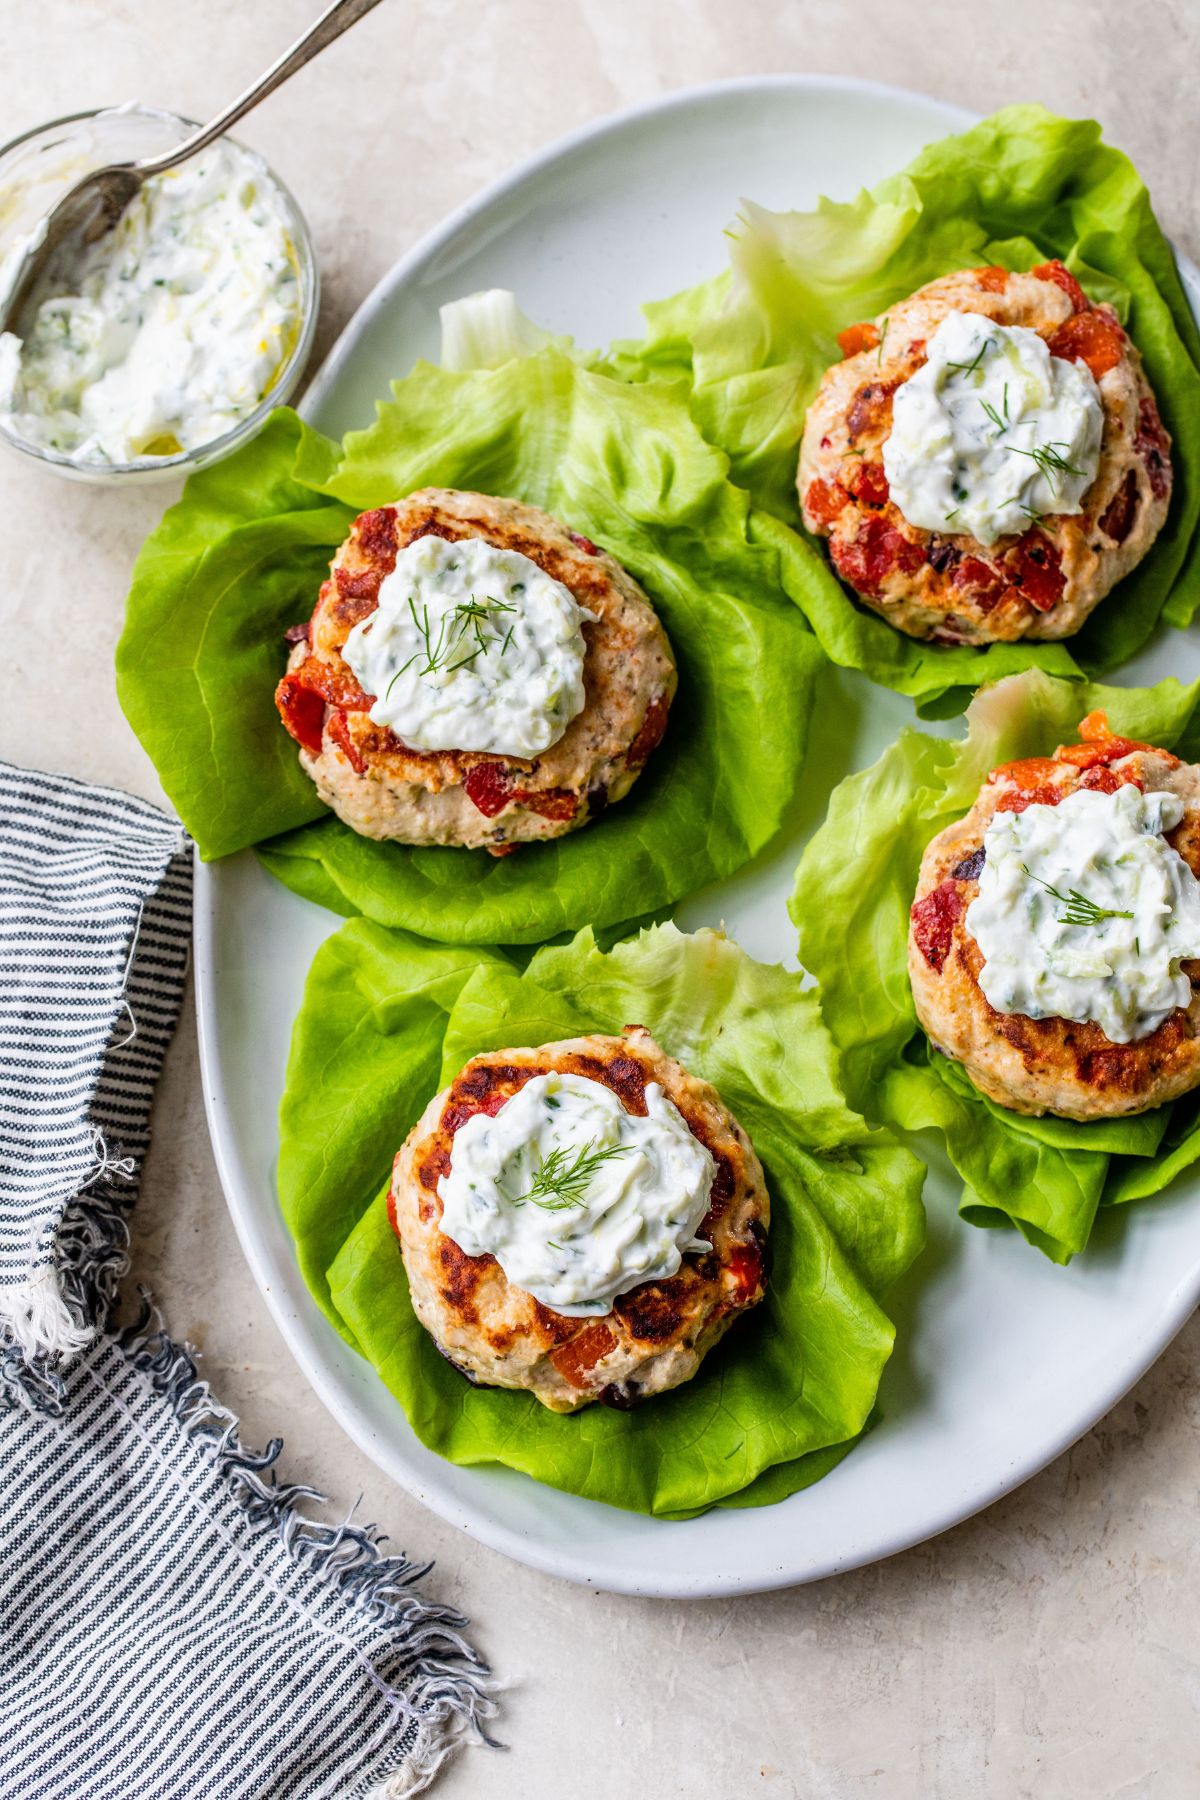 Burger patties on lettuce leaves topped with sauce.